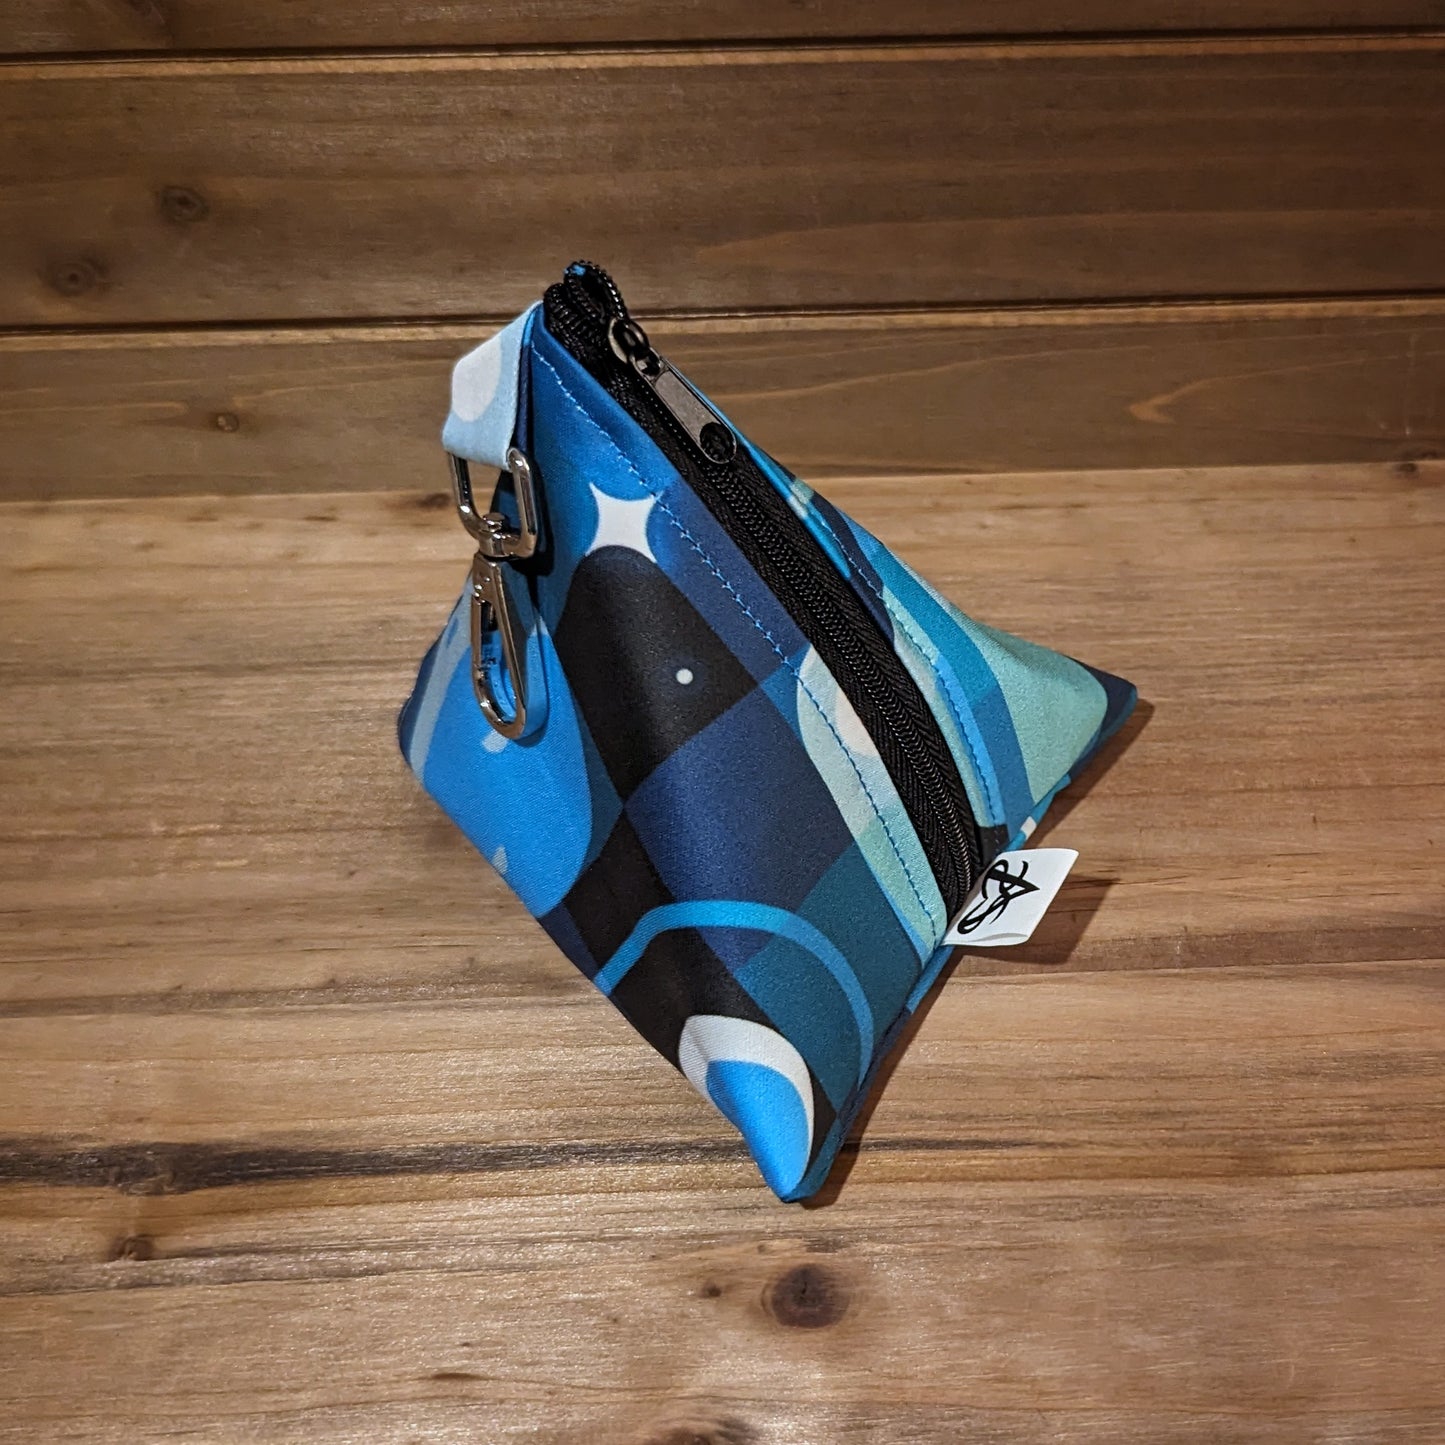 A D4 bag with blue toned rockets flying through tonal squares around planets and stars.